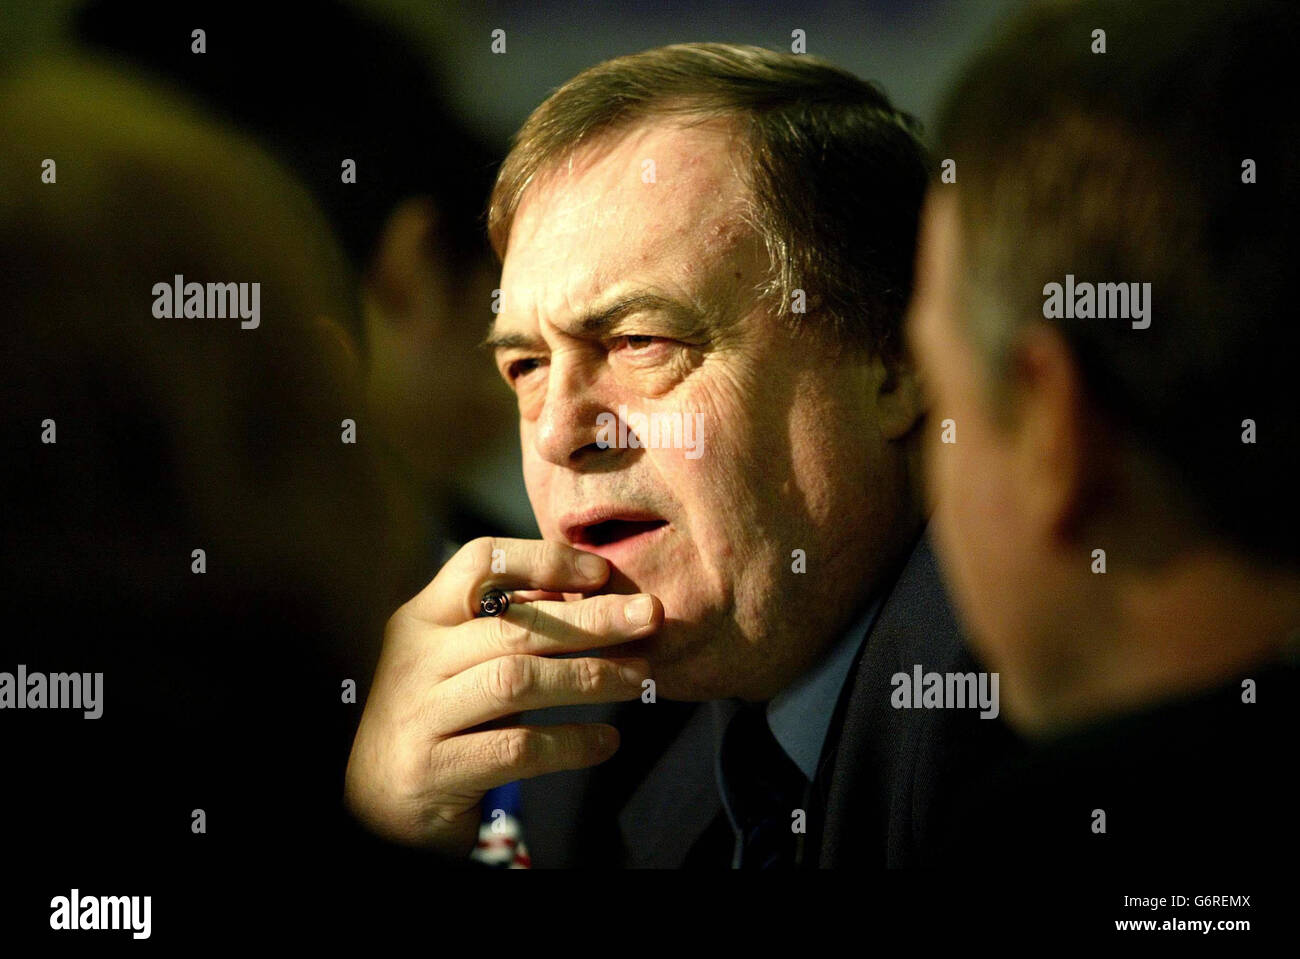 Deputy Prime Minister John Prescott talks to people at the Swan Hunter shipyard in Wallsend, Tyneside, as part of Labour's Big Conversation project. Mr Prescott was set to take part in two of the events in the area - at the shipyard and at the Civic Centre in Gateshead - meeting members of the public, with the central theme of skills and the economy. Stock Photo